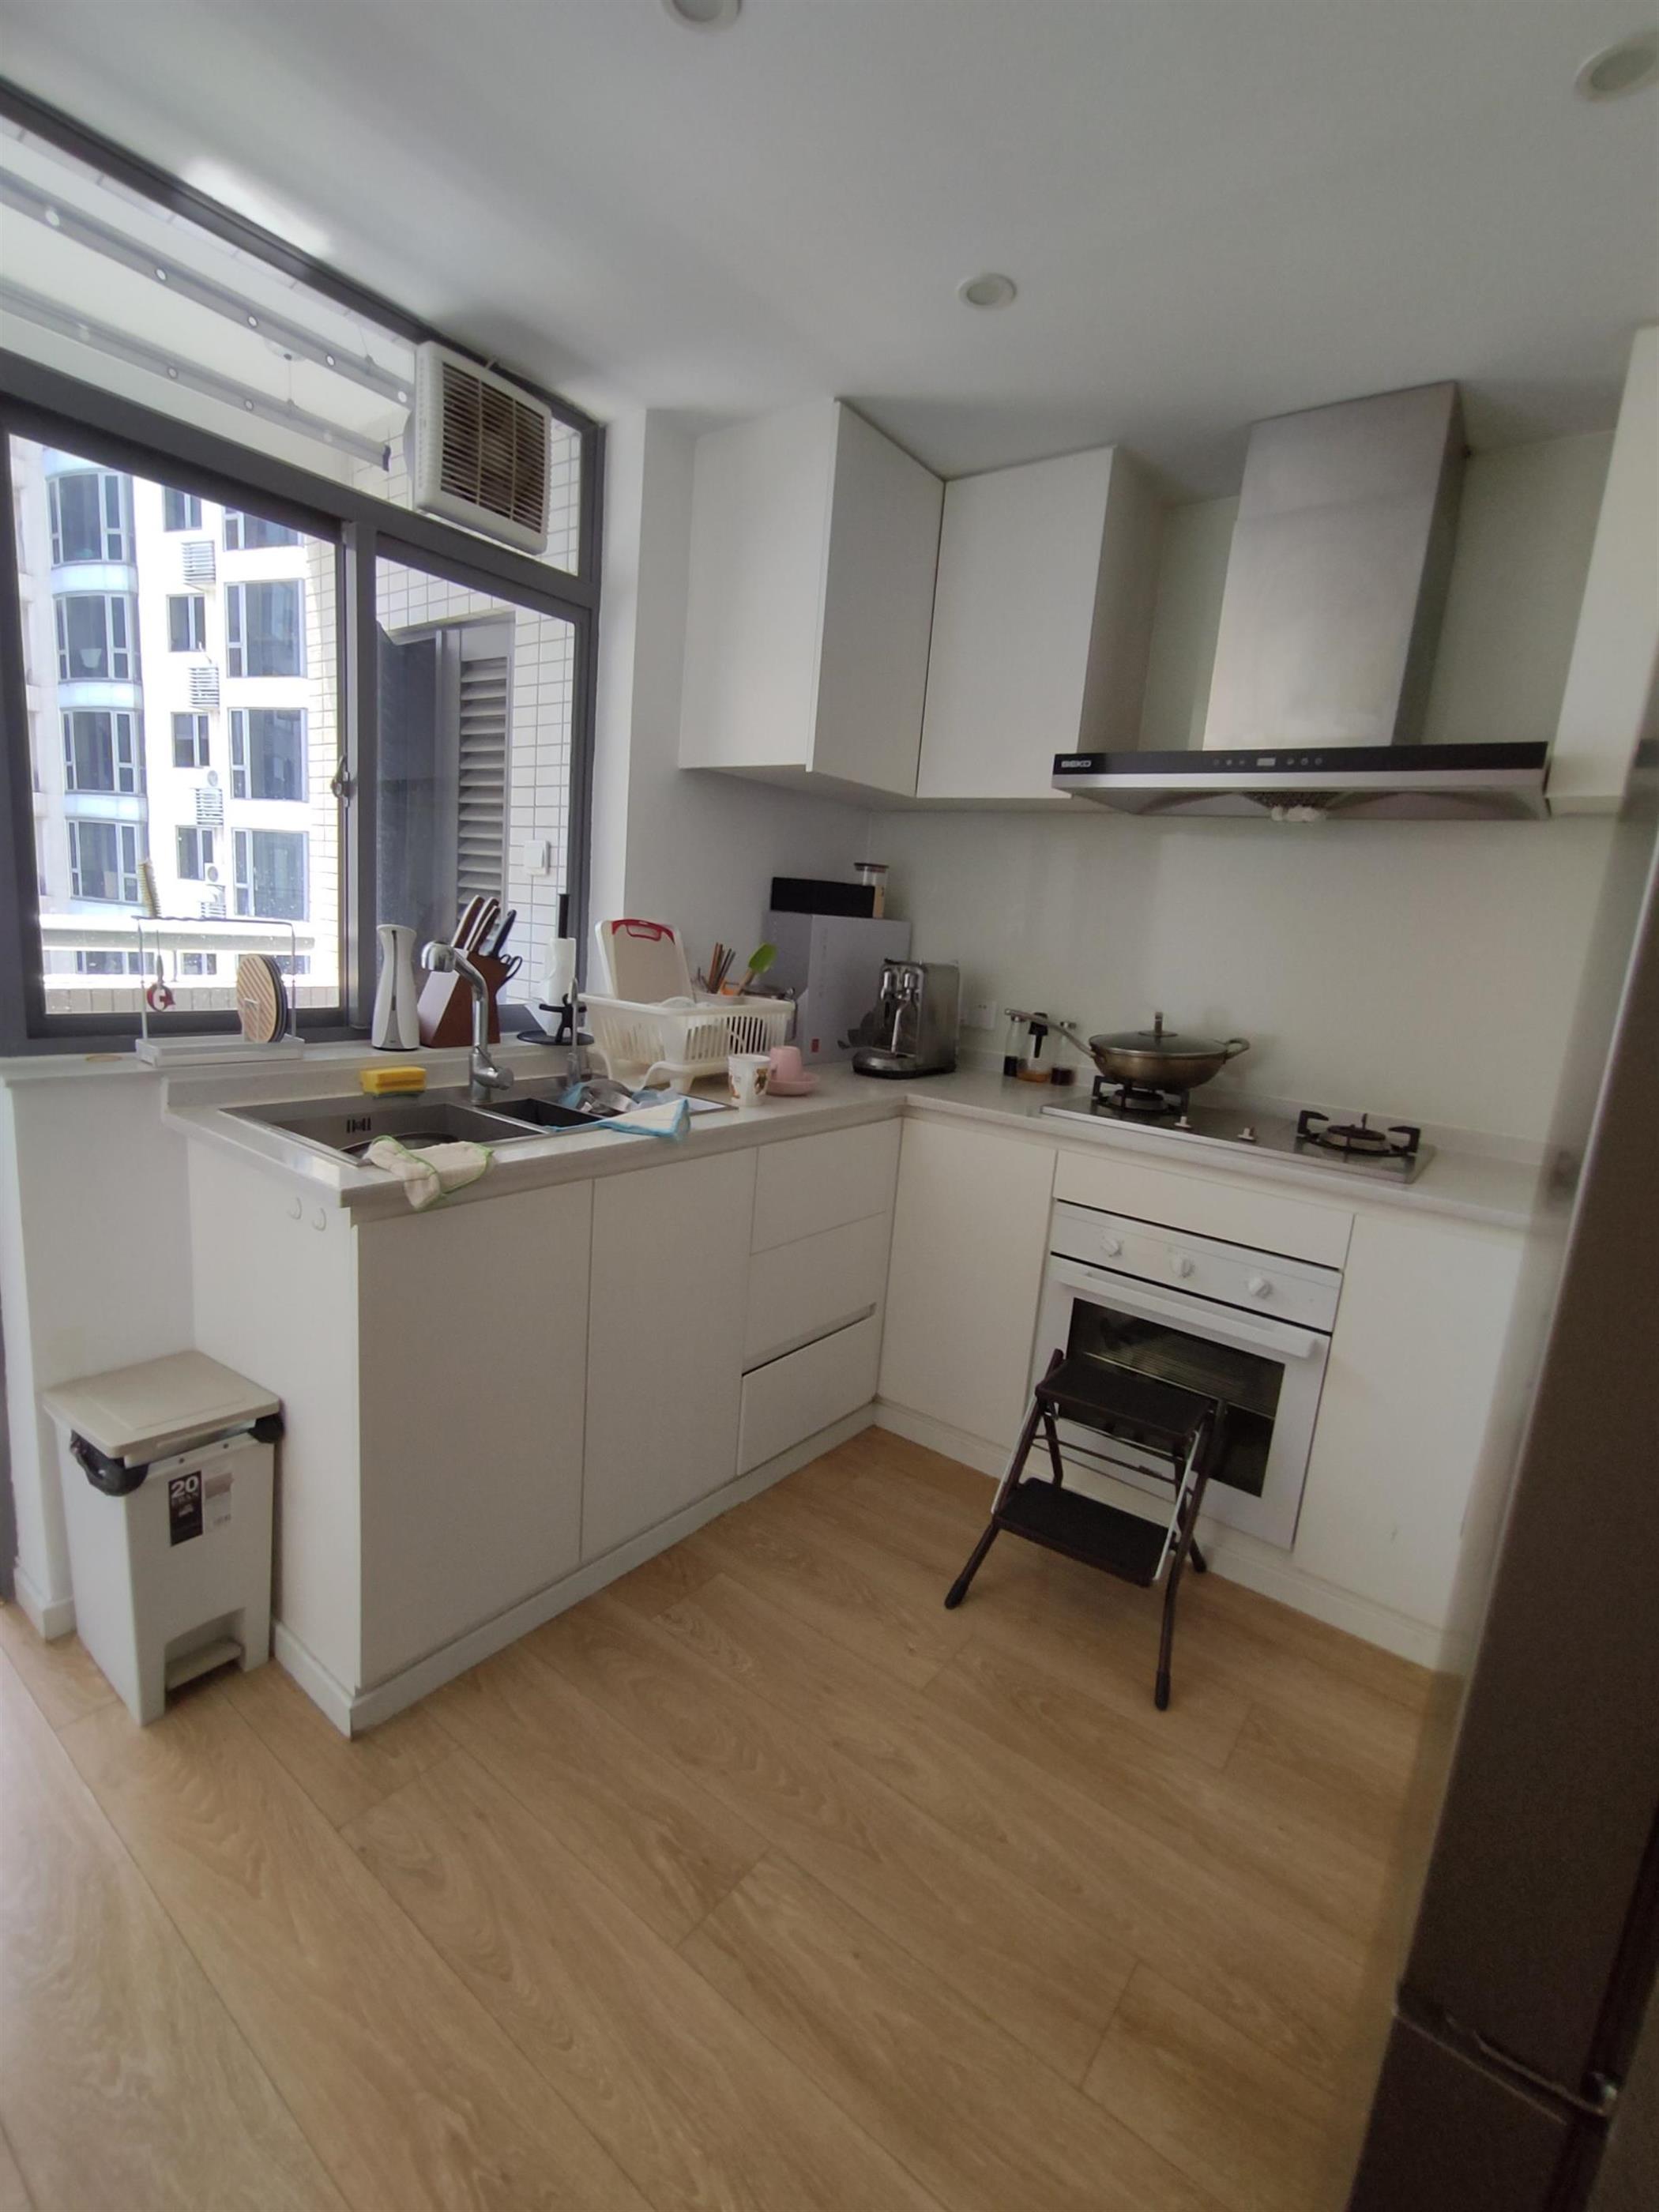 Large kitchen Fantastic 3BR Summit Apt for Rent in Downtown FFC Shanghai